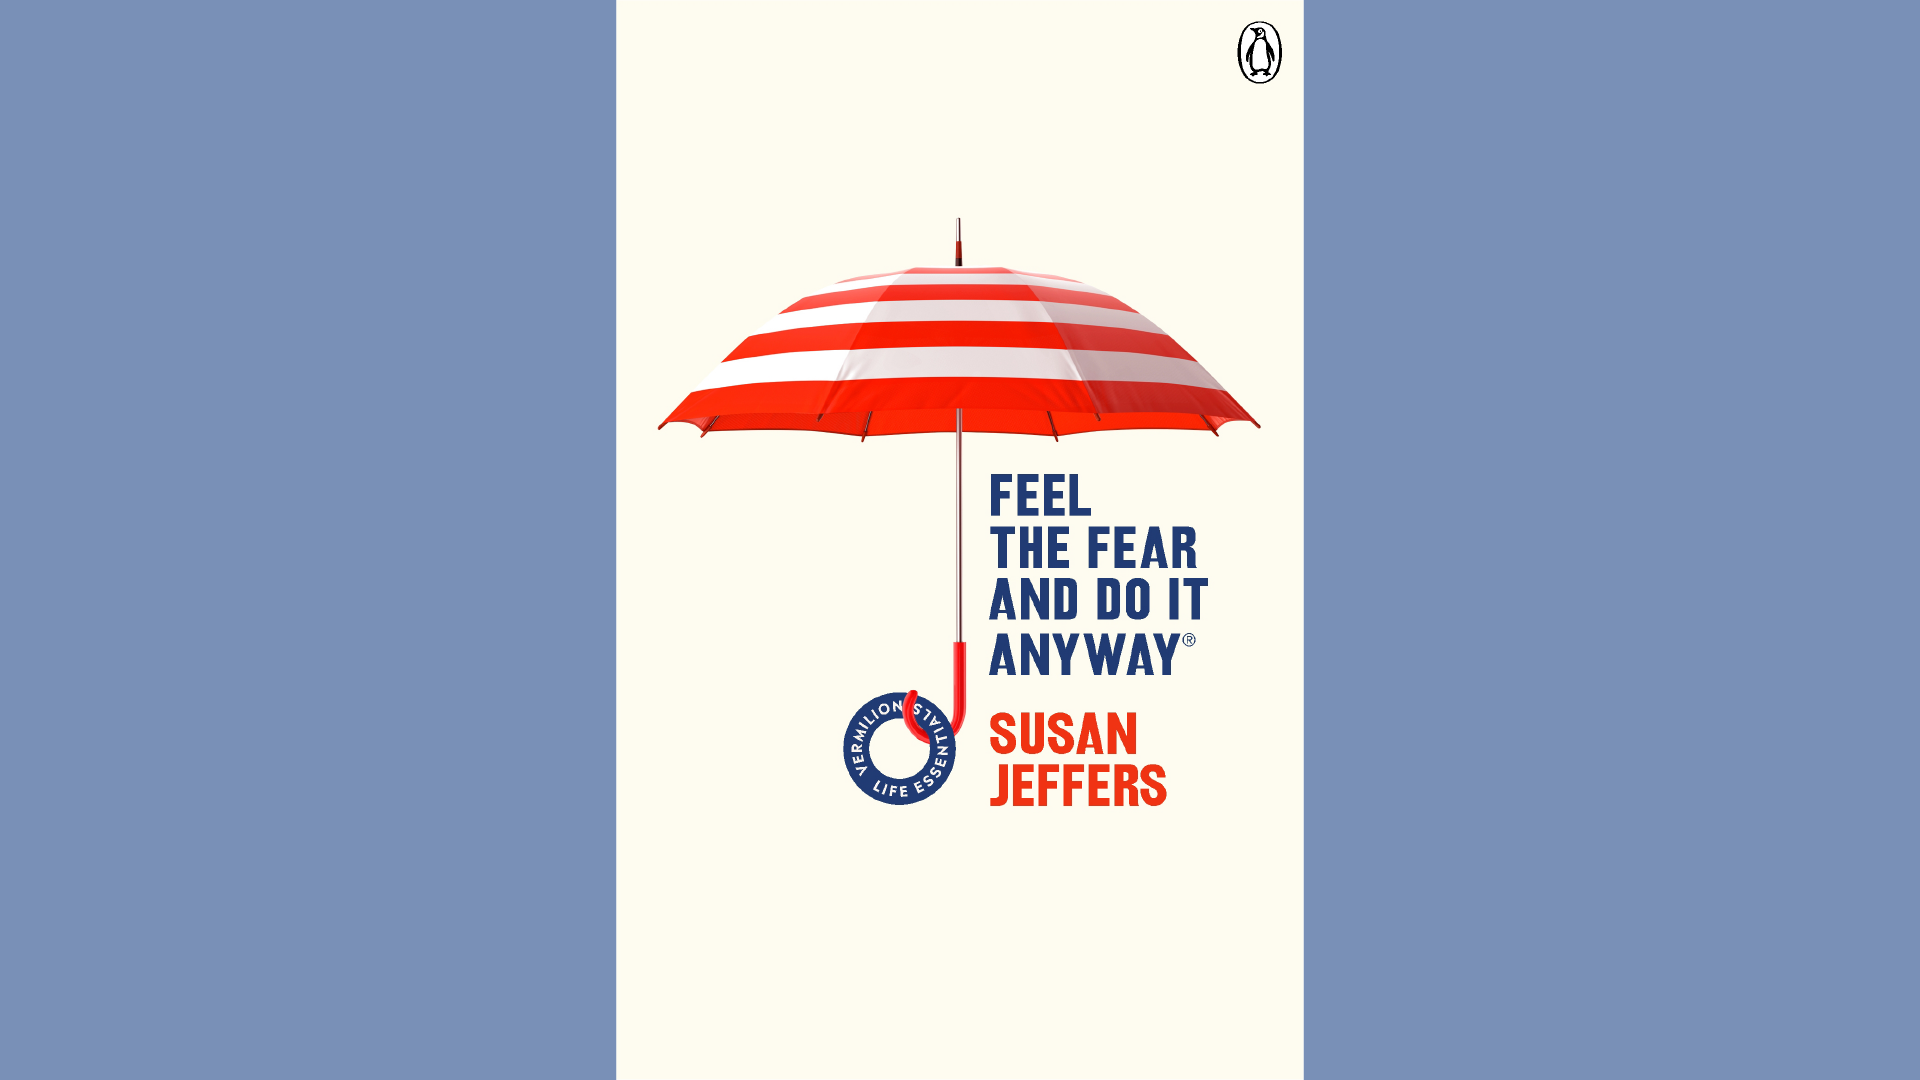 Summary: Feel the Fear and Do It Anyway by Susan Jeffers